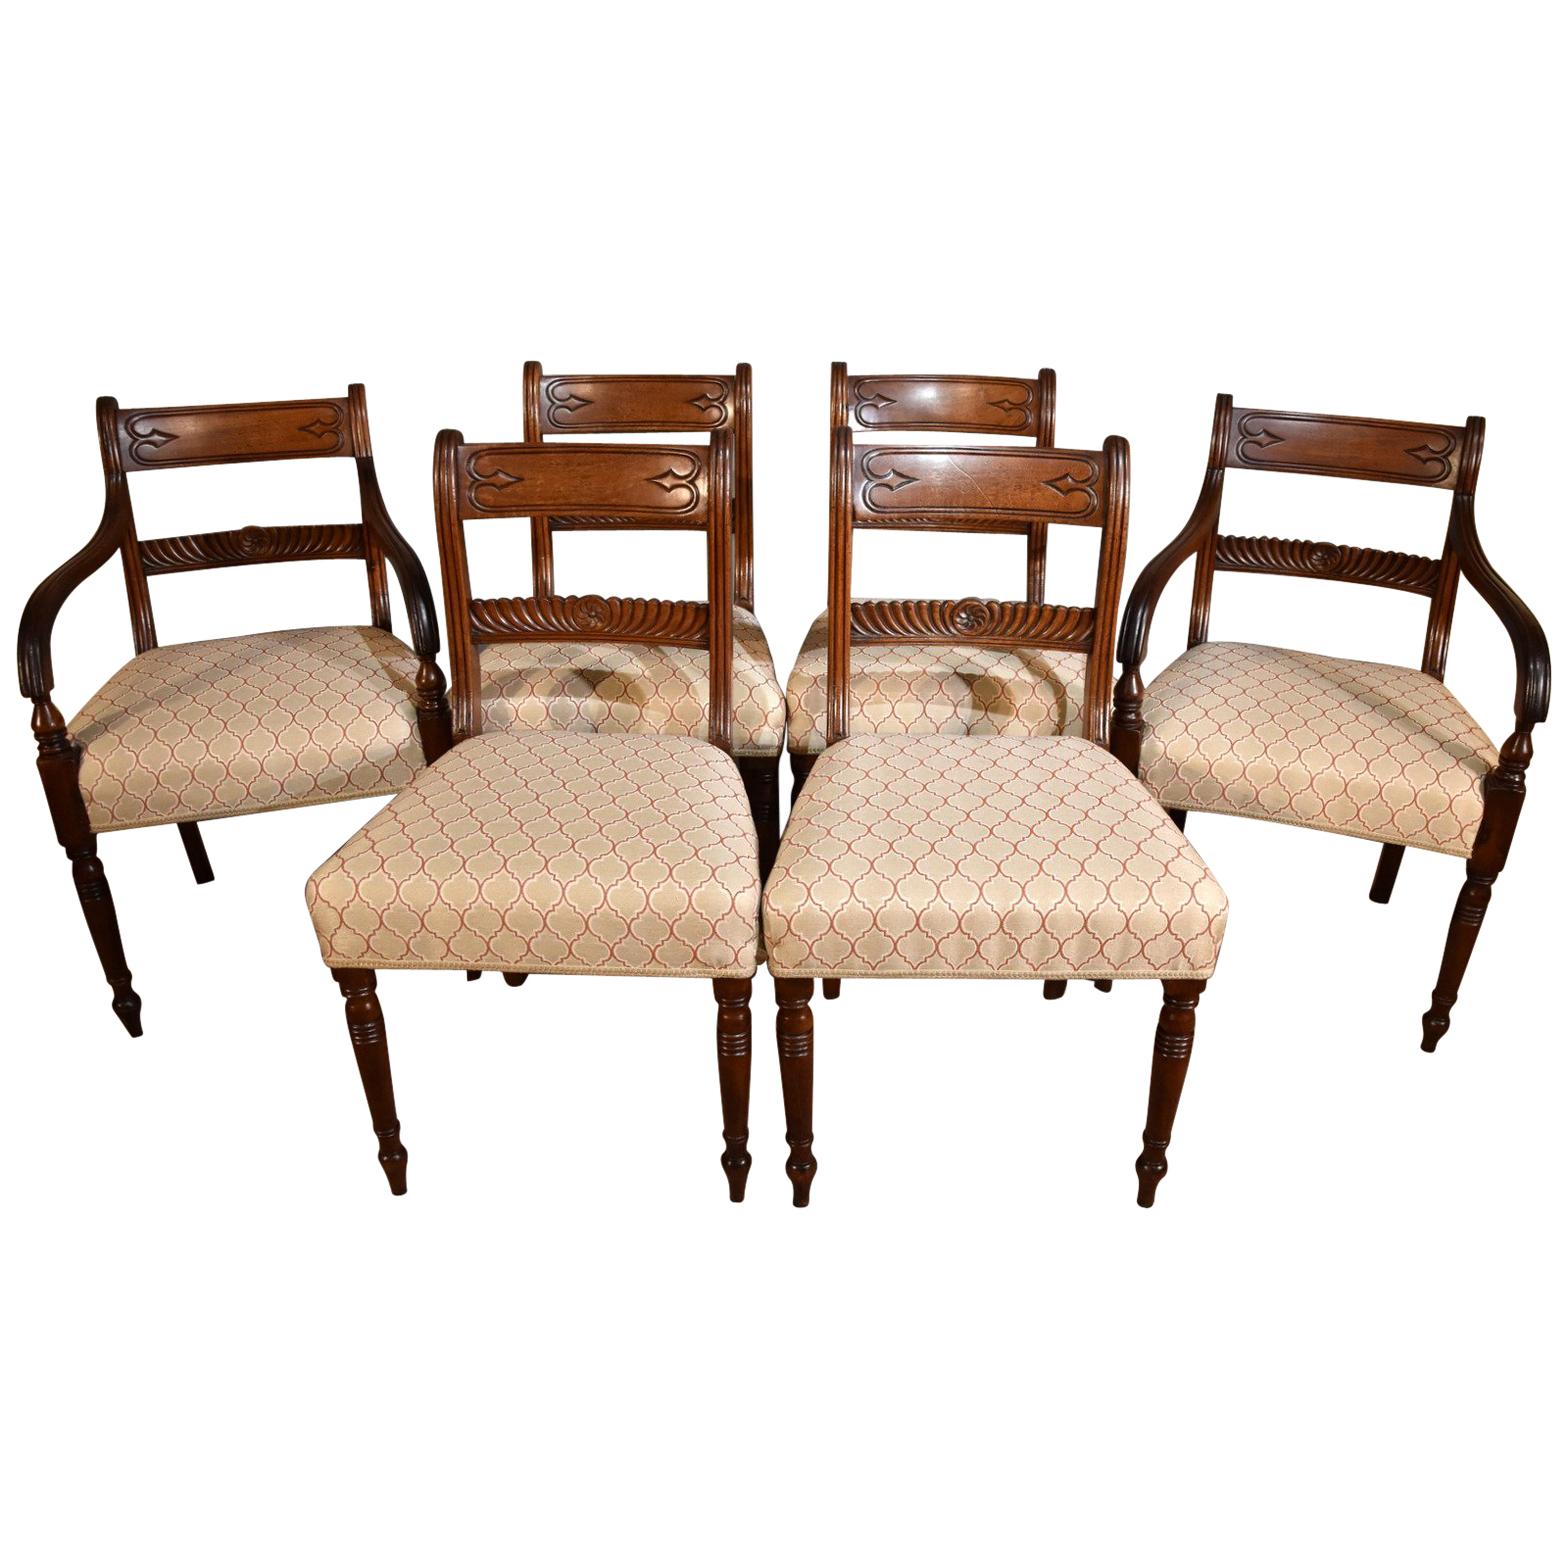 Superb Set of Eight Regency Period Mahogany Dining Chairs